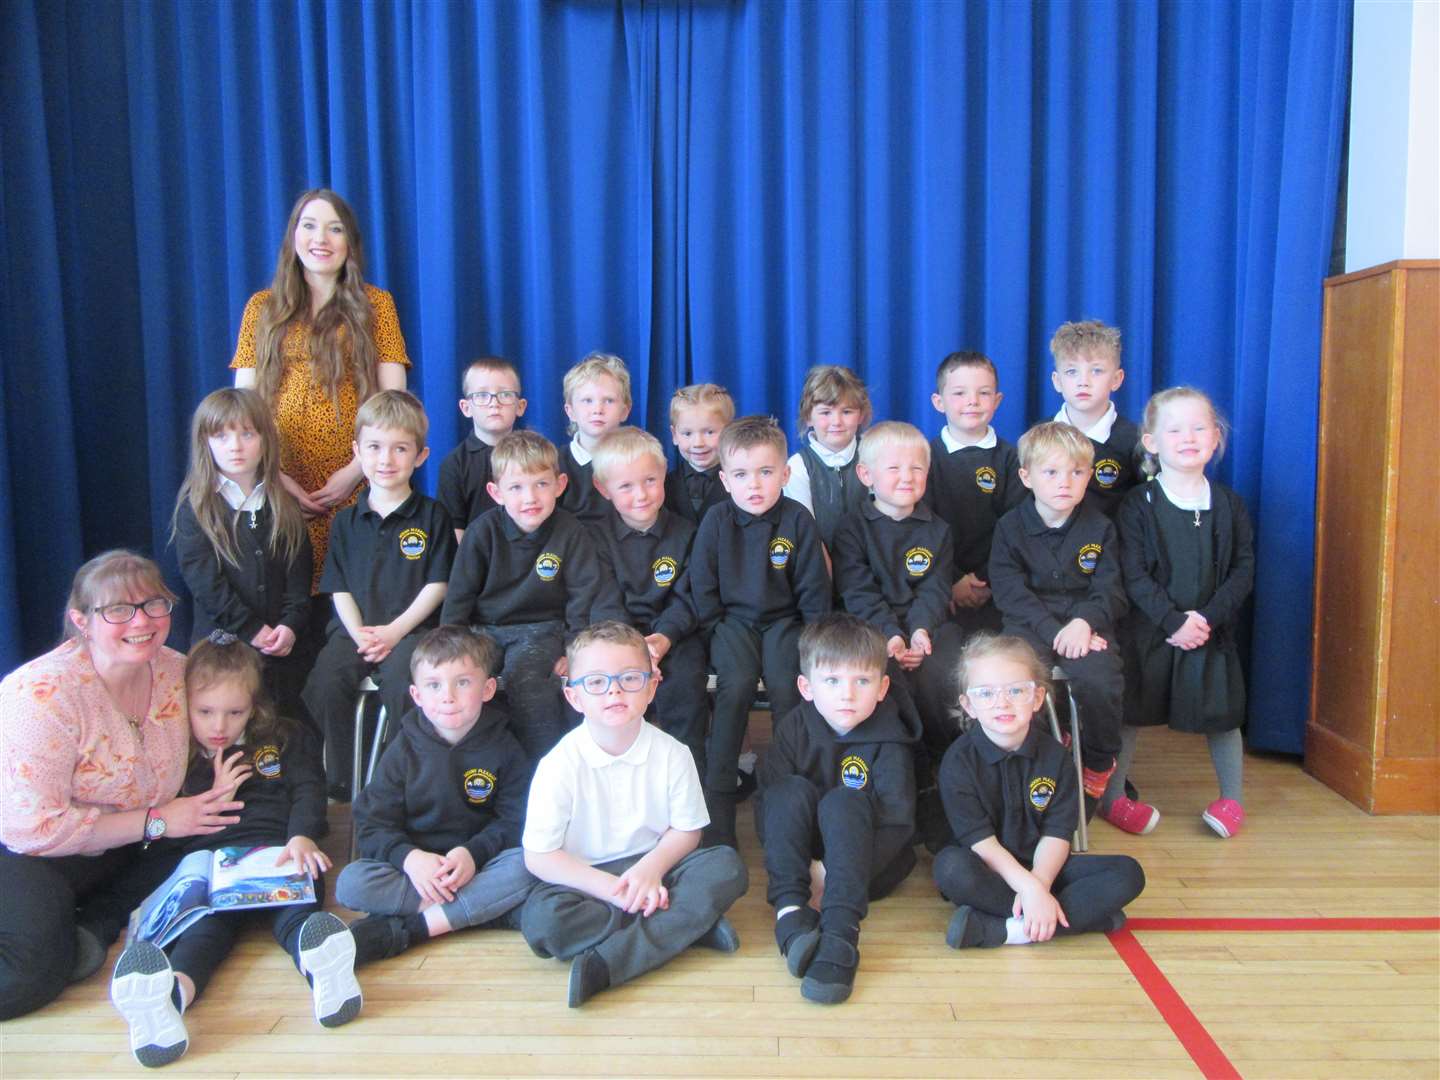 The new primary 1 intake at Mount Pleasant Primary School in Thurso, with class teacher Mrs Laura Tait (back, standing) and volunteer Mrs Sara Taylor (front left).